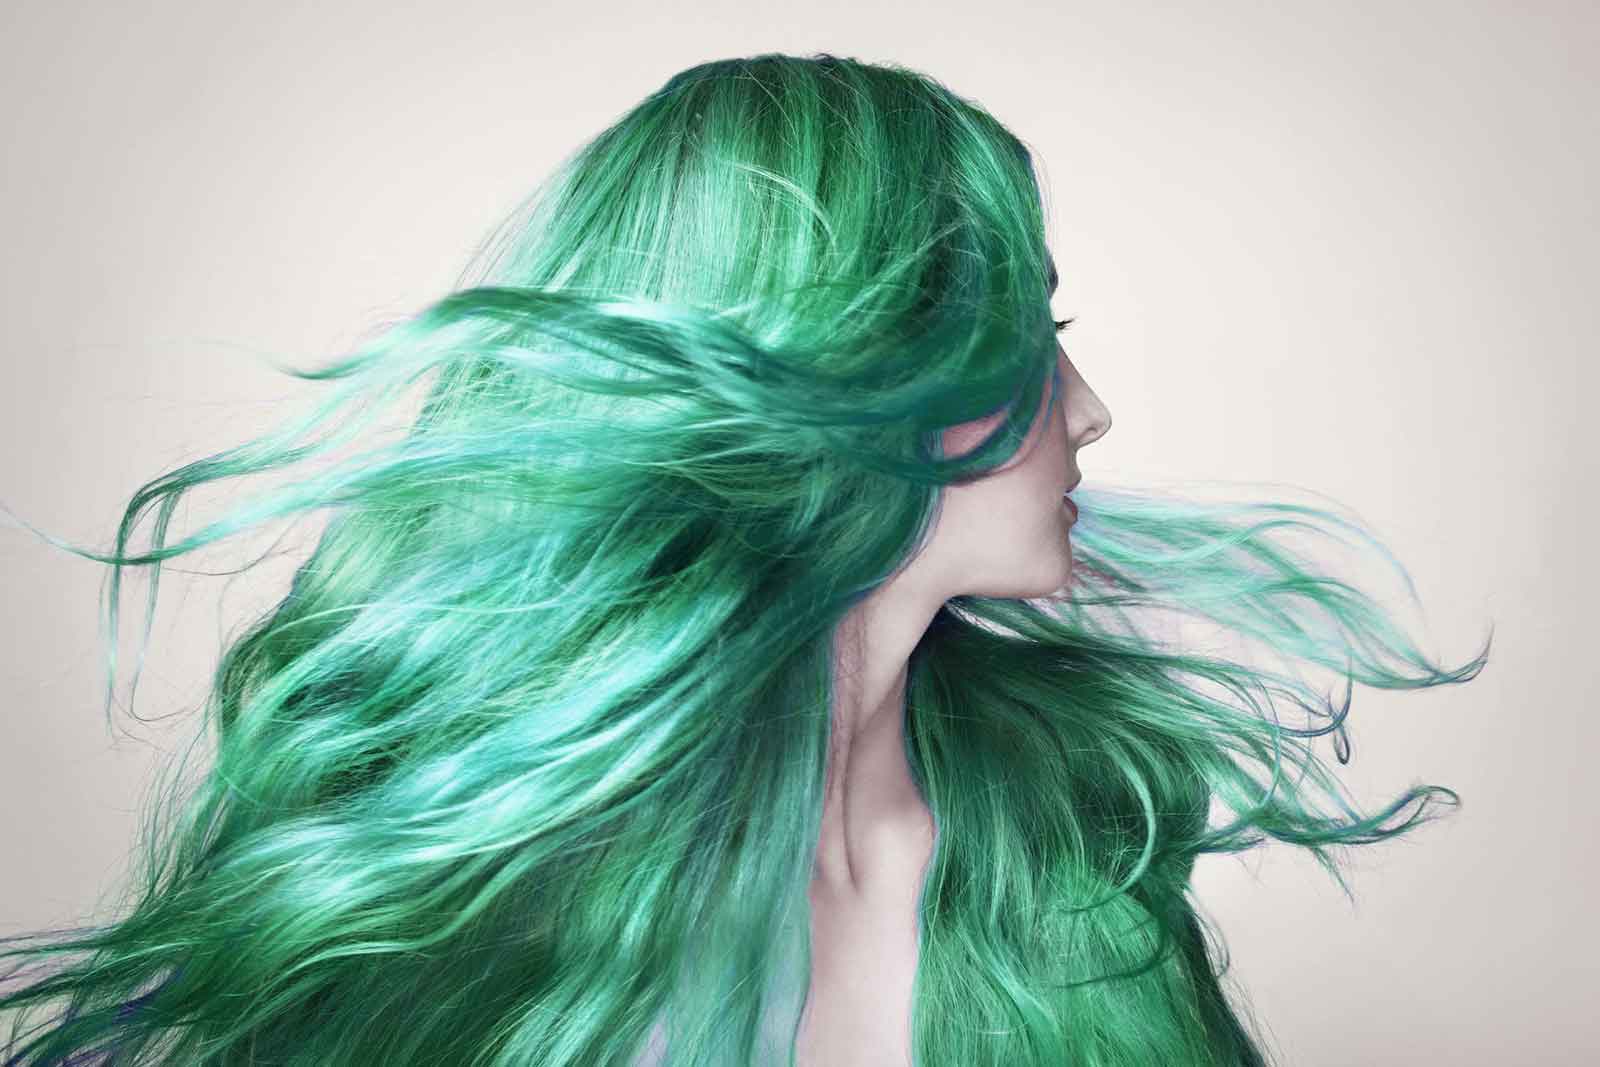 Green Hair Color For St. Patrick's Day? Think it Through! by David Barron